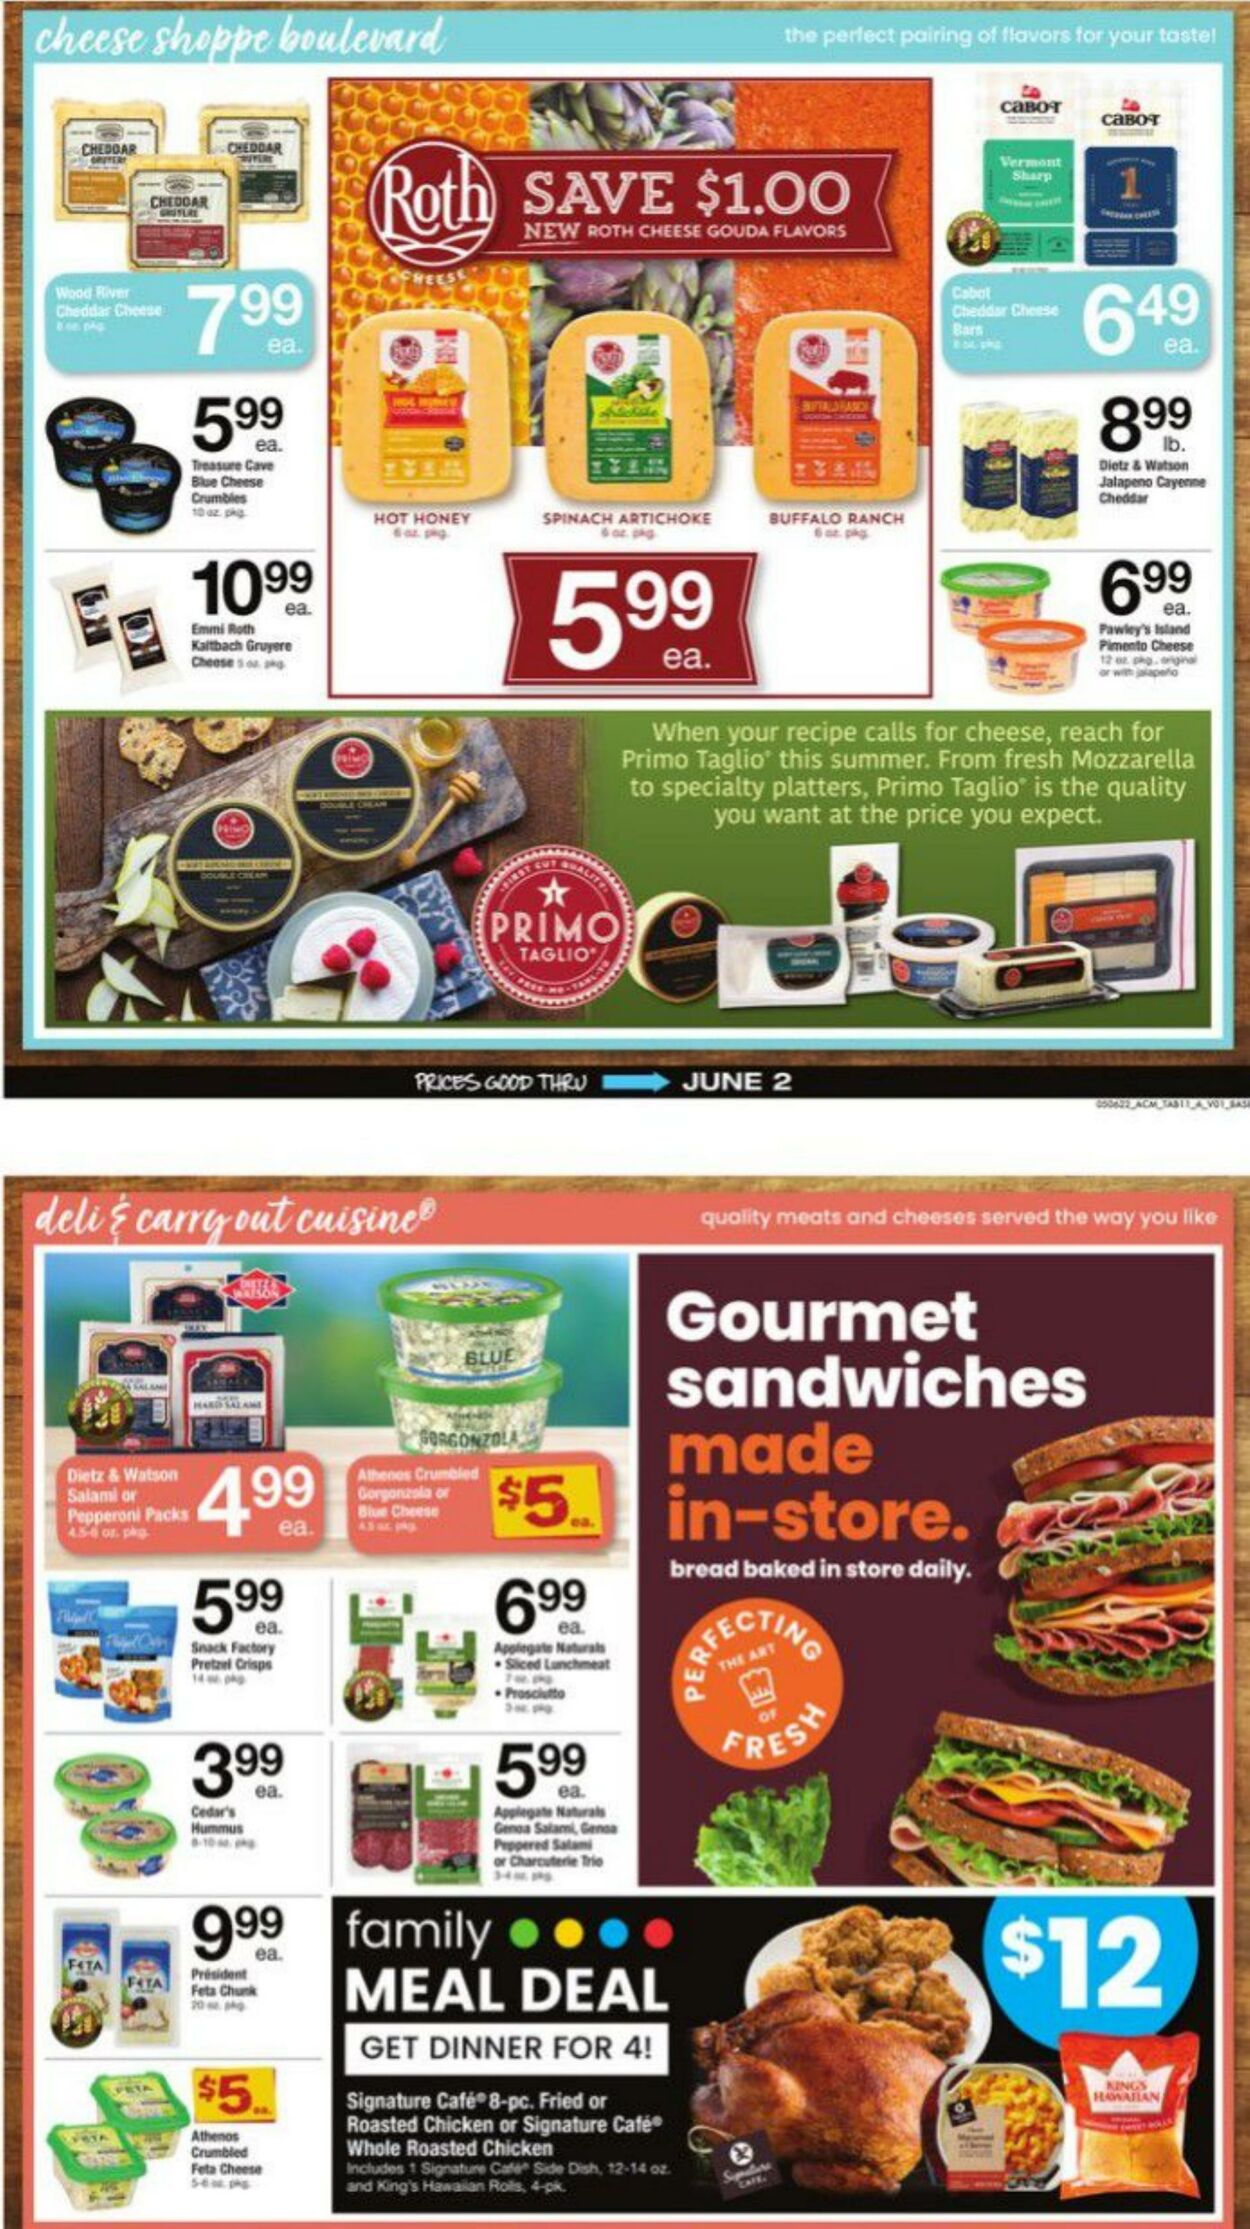 Weekly ad Acme 05/06/2022 - 06/02/2022